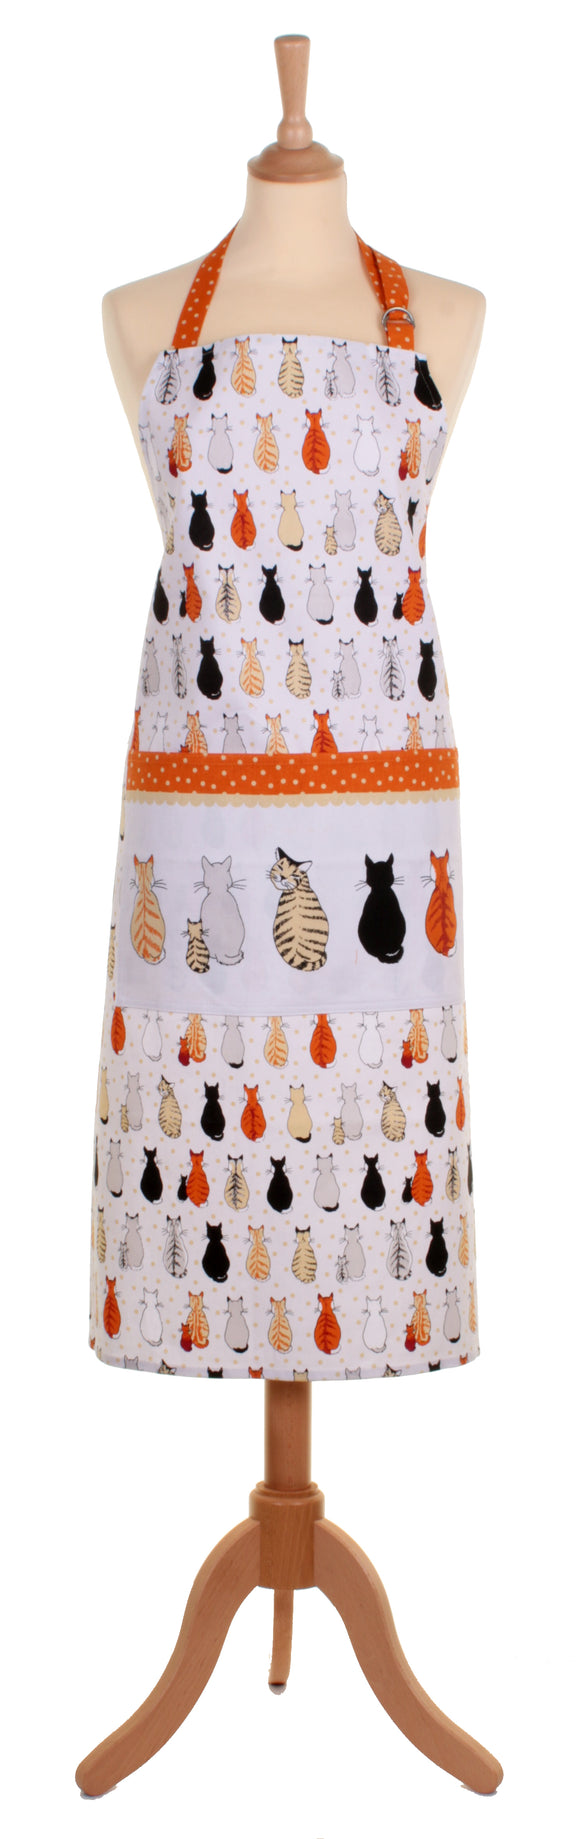 Cat in waiting Ulster Weavers Cotton Apron - Gifteasy Online